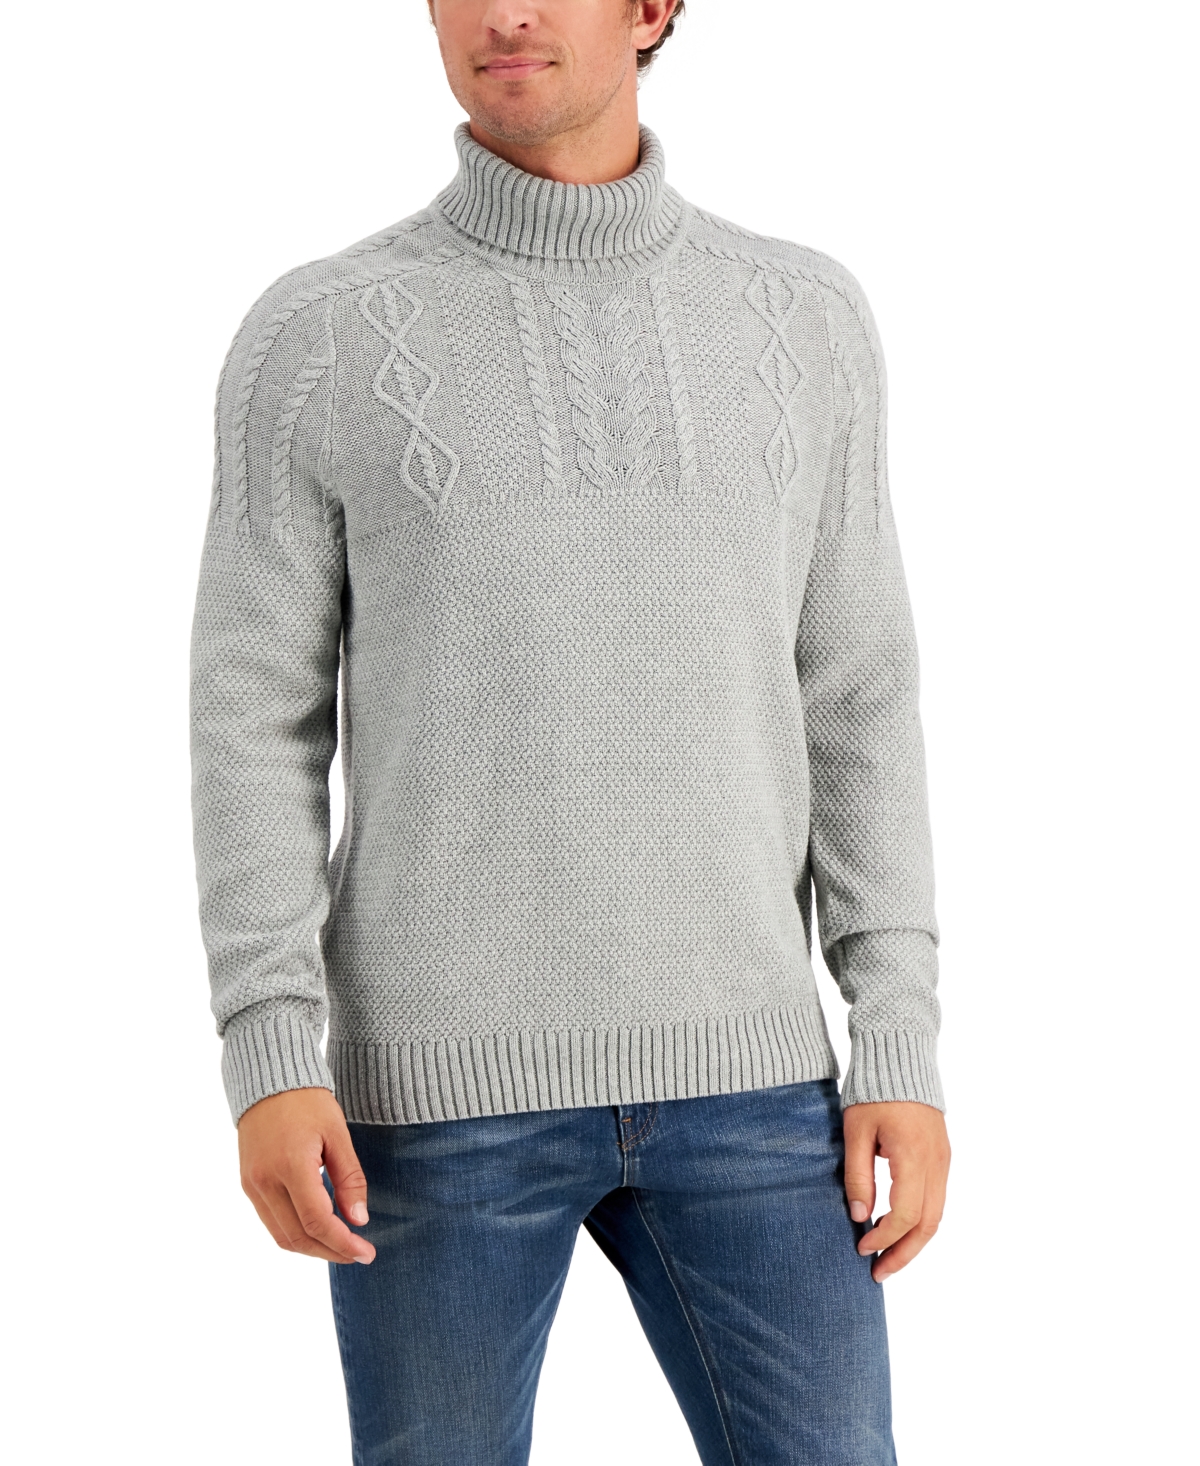 Men's Chunky Cable Knit Turtleneck Sweater, Created for Macy's - Soft Grey Heather